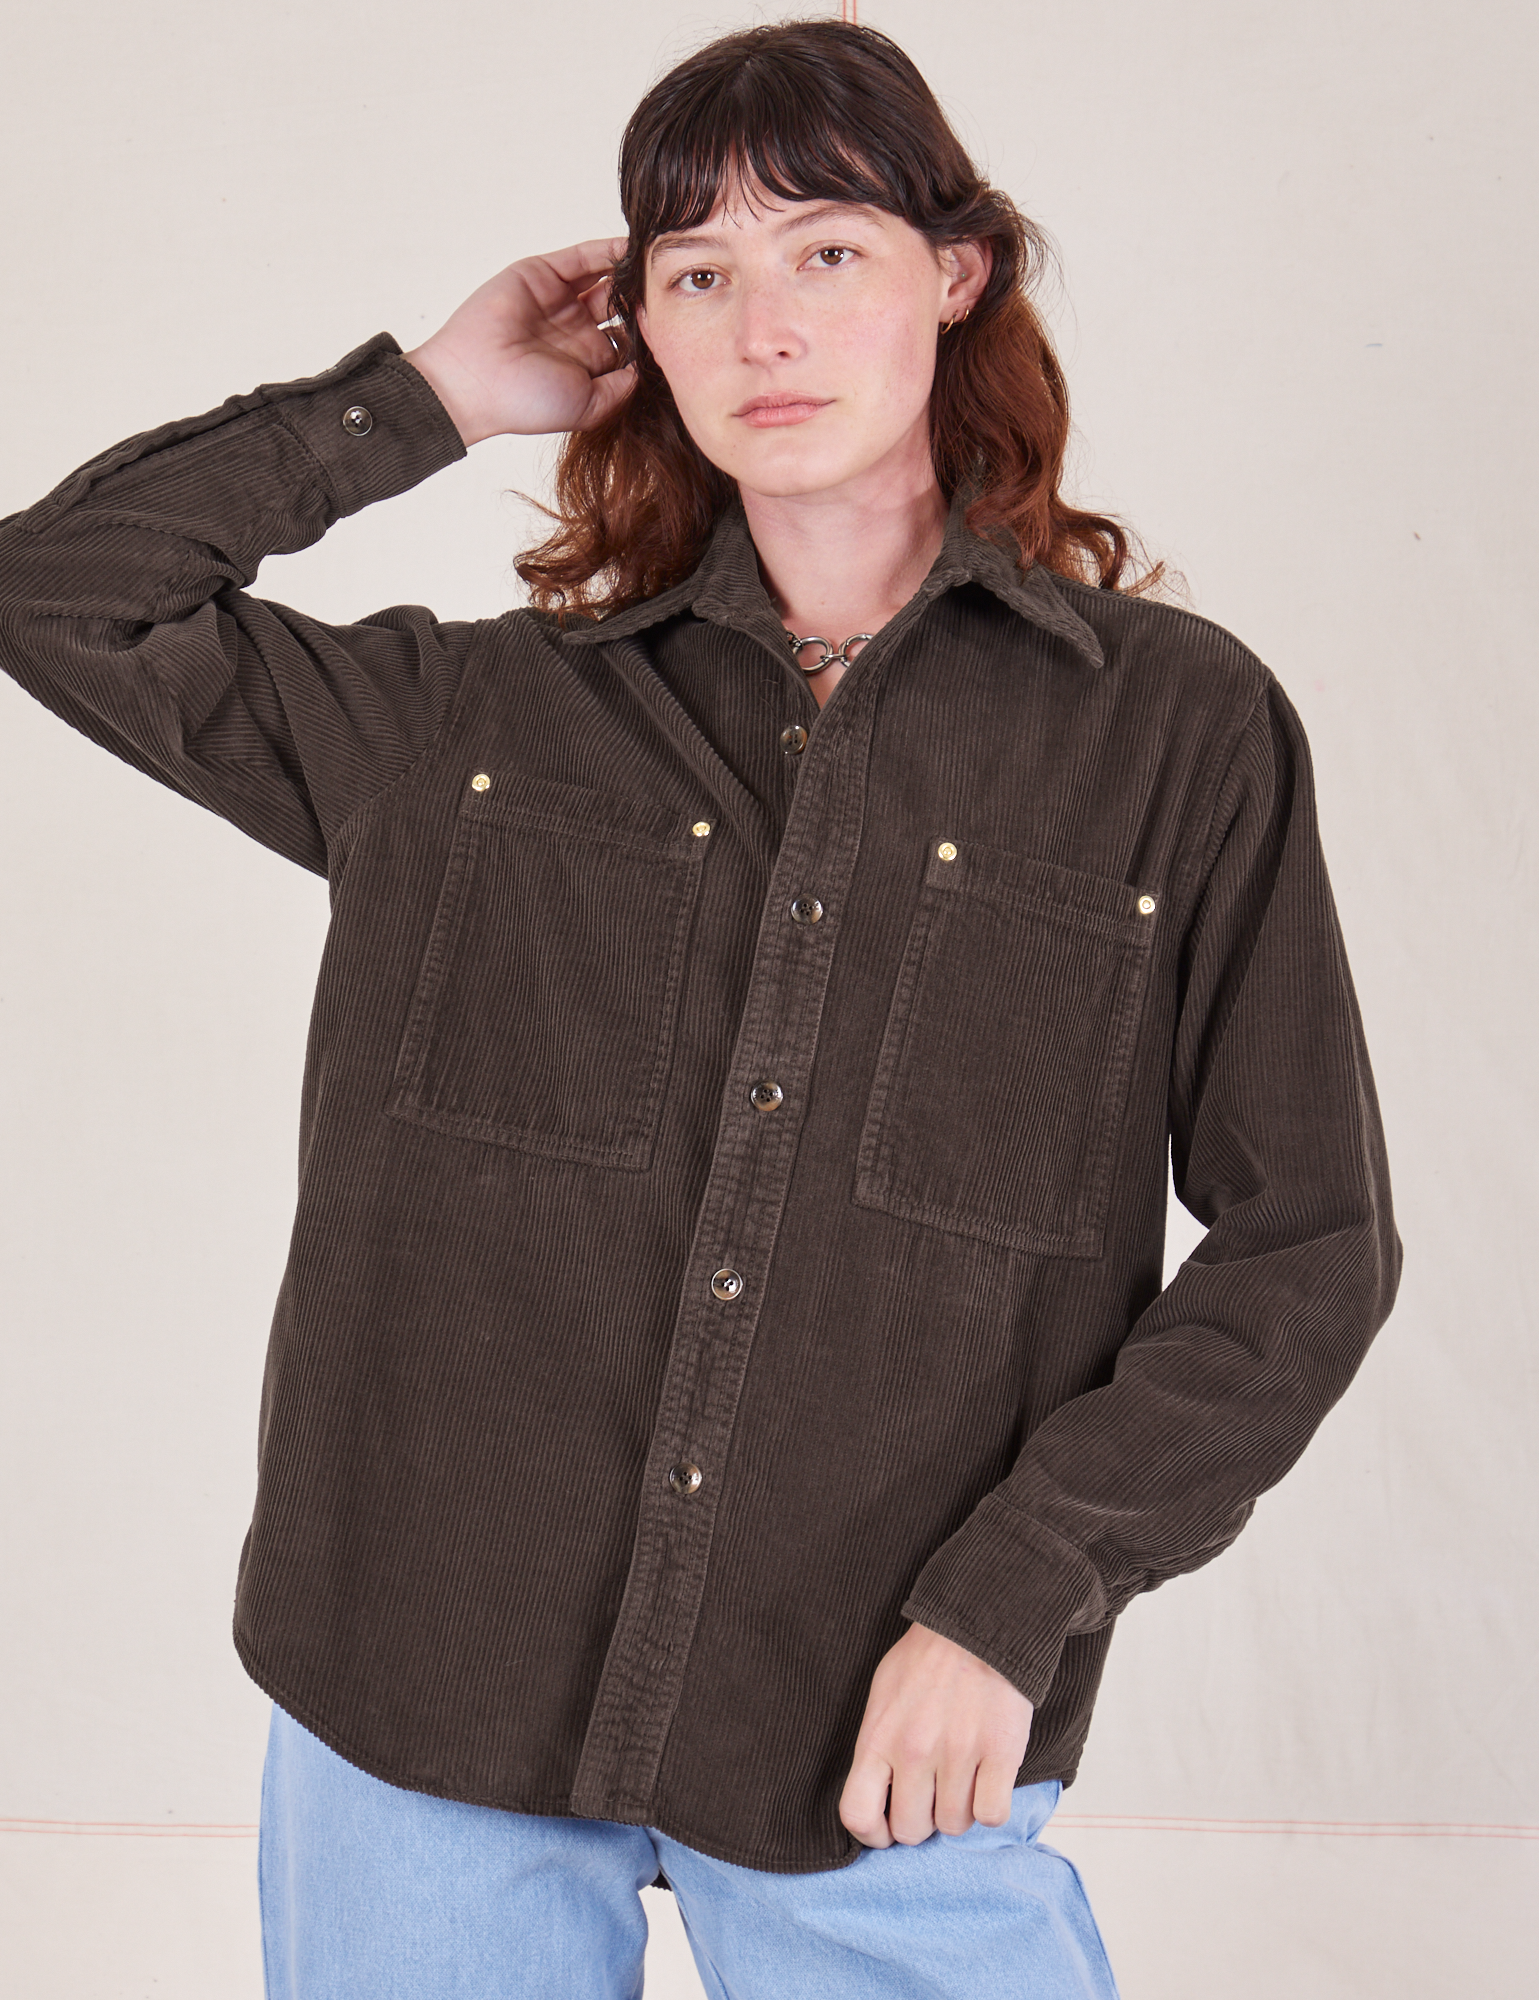 Alex is 5'8" and wearing P Corduroy Overshirt in Espresso Brown